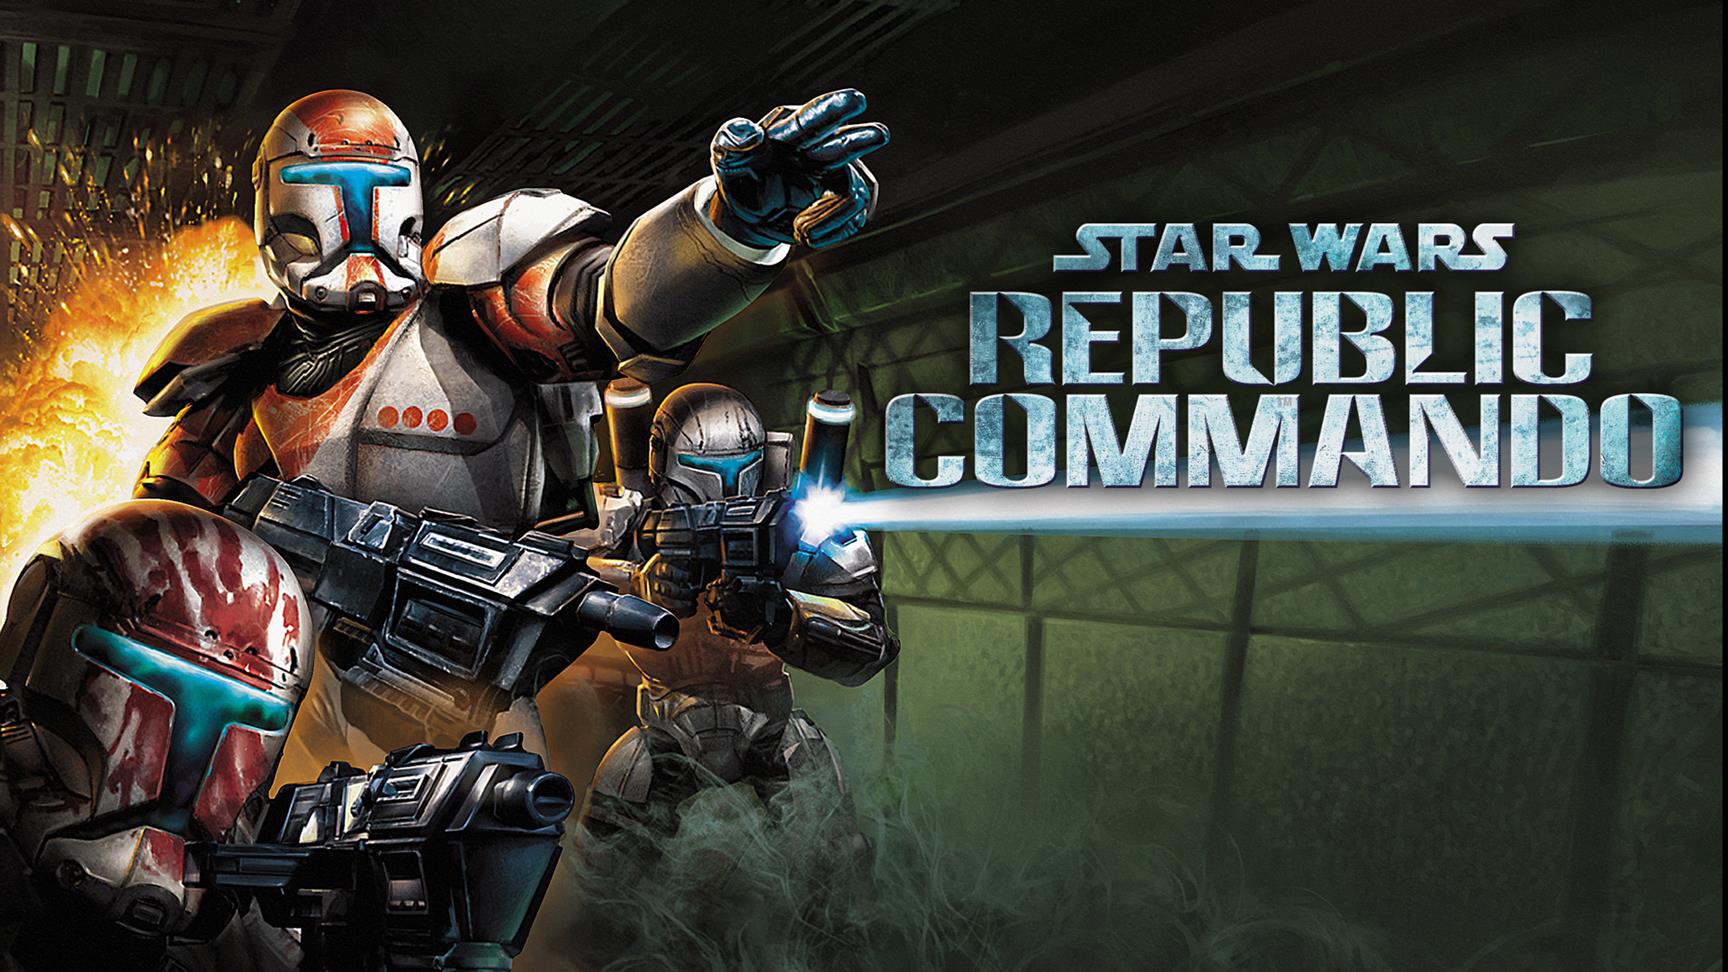 Image for Star Wars Republic Commando is coming to PS4 and Switch